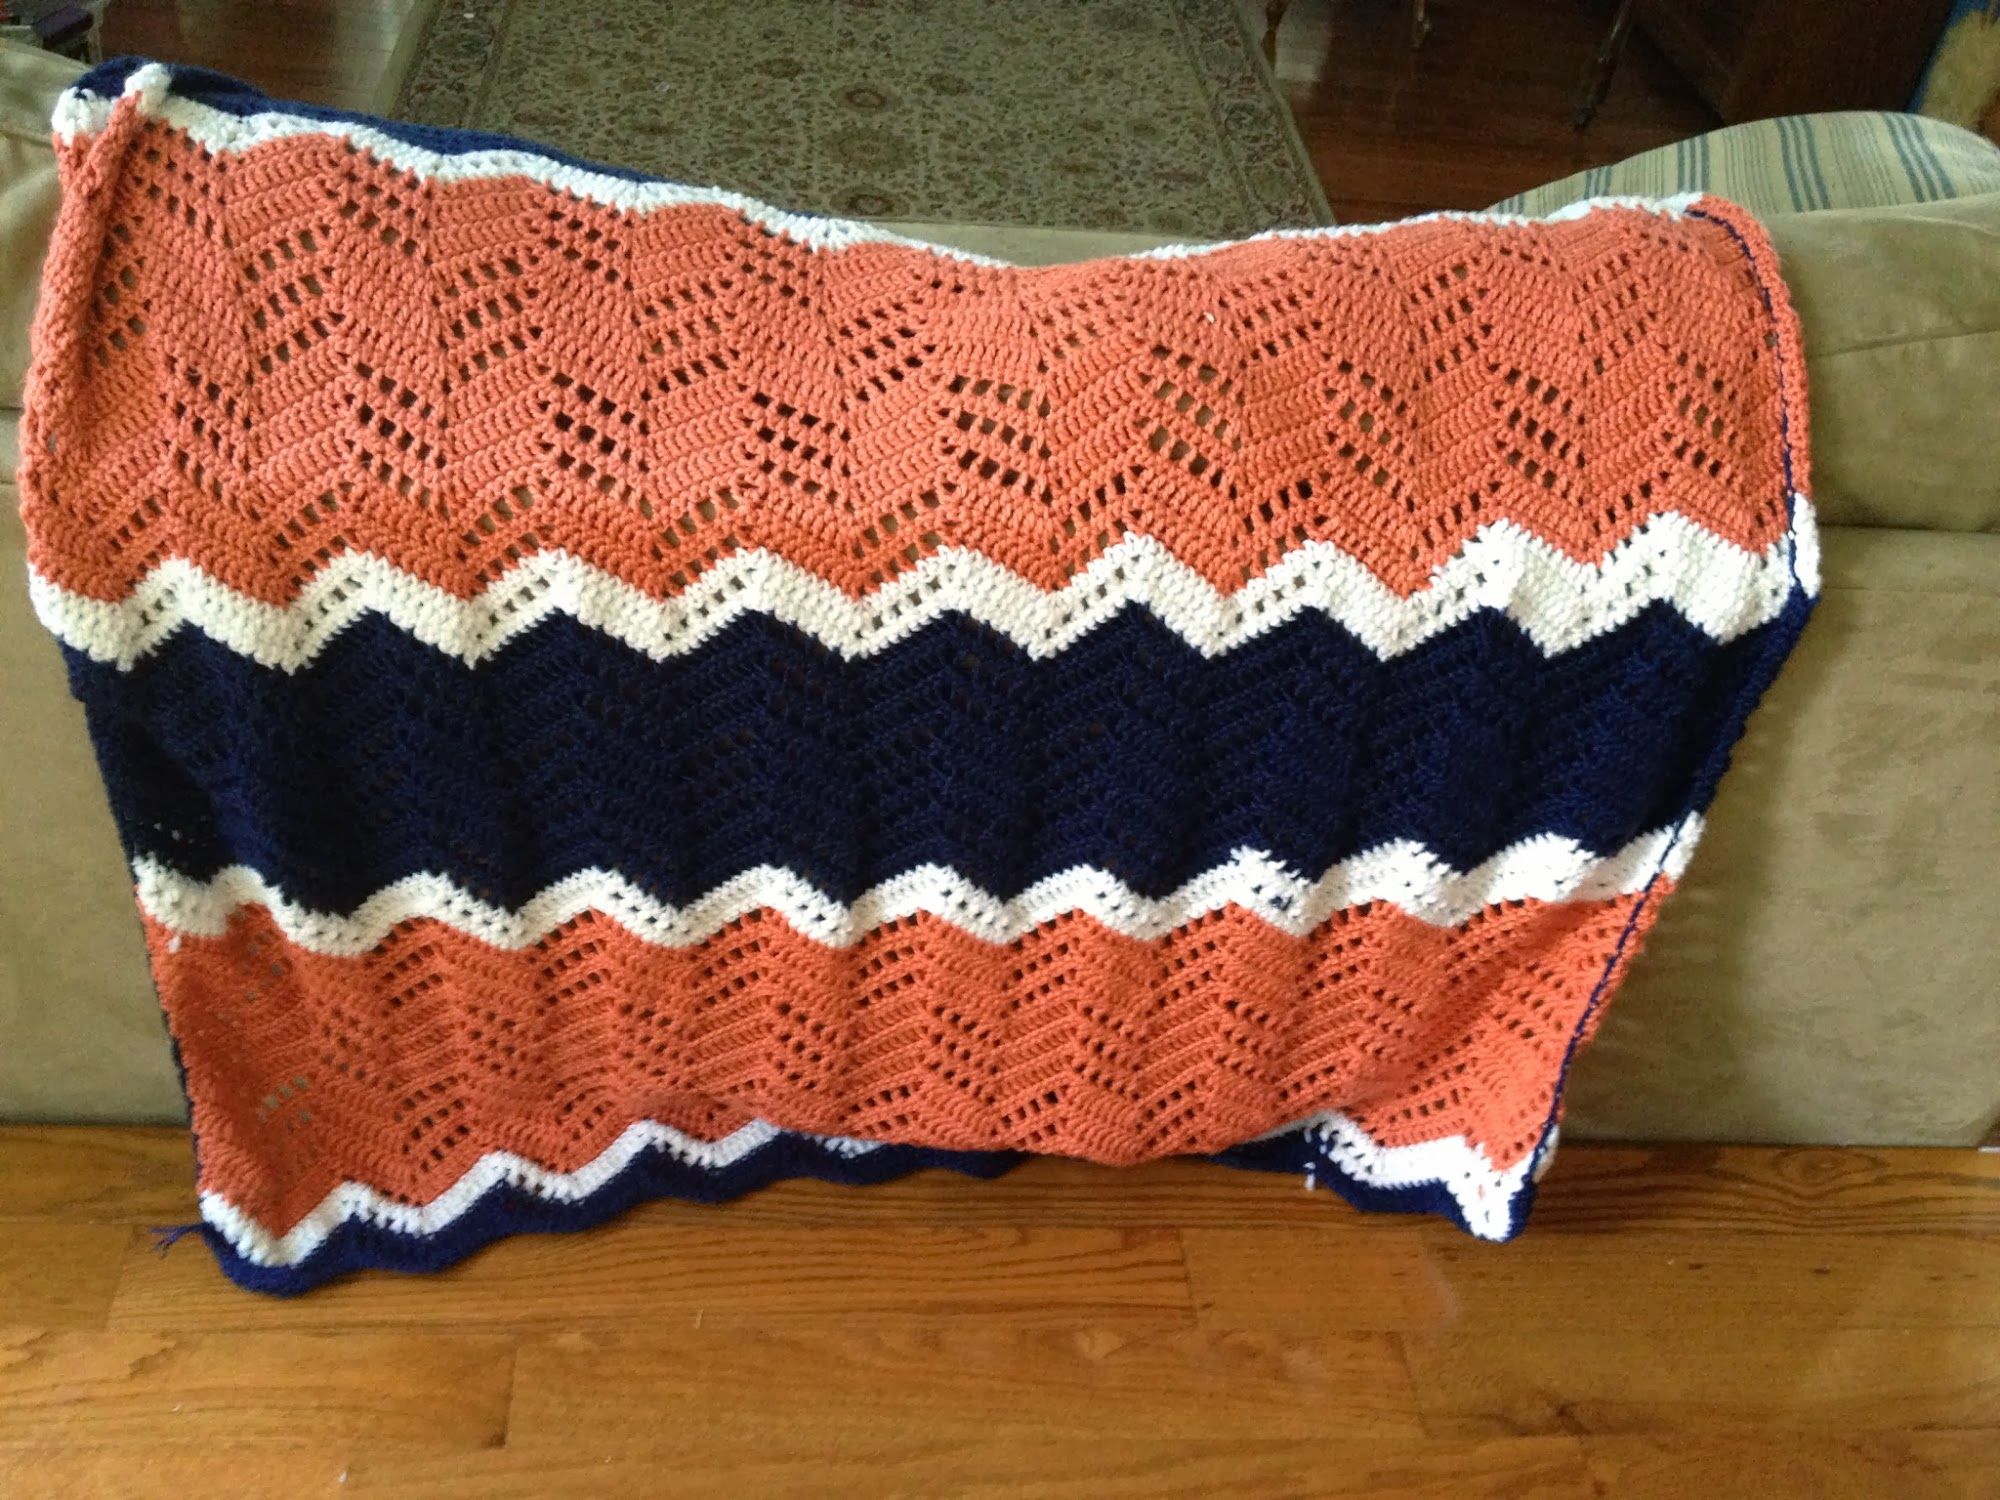  The blanket I made for her and her husband. 